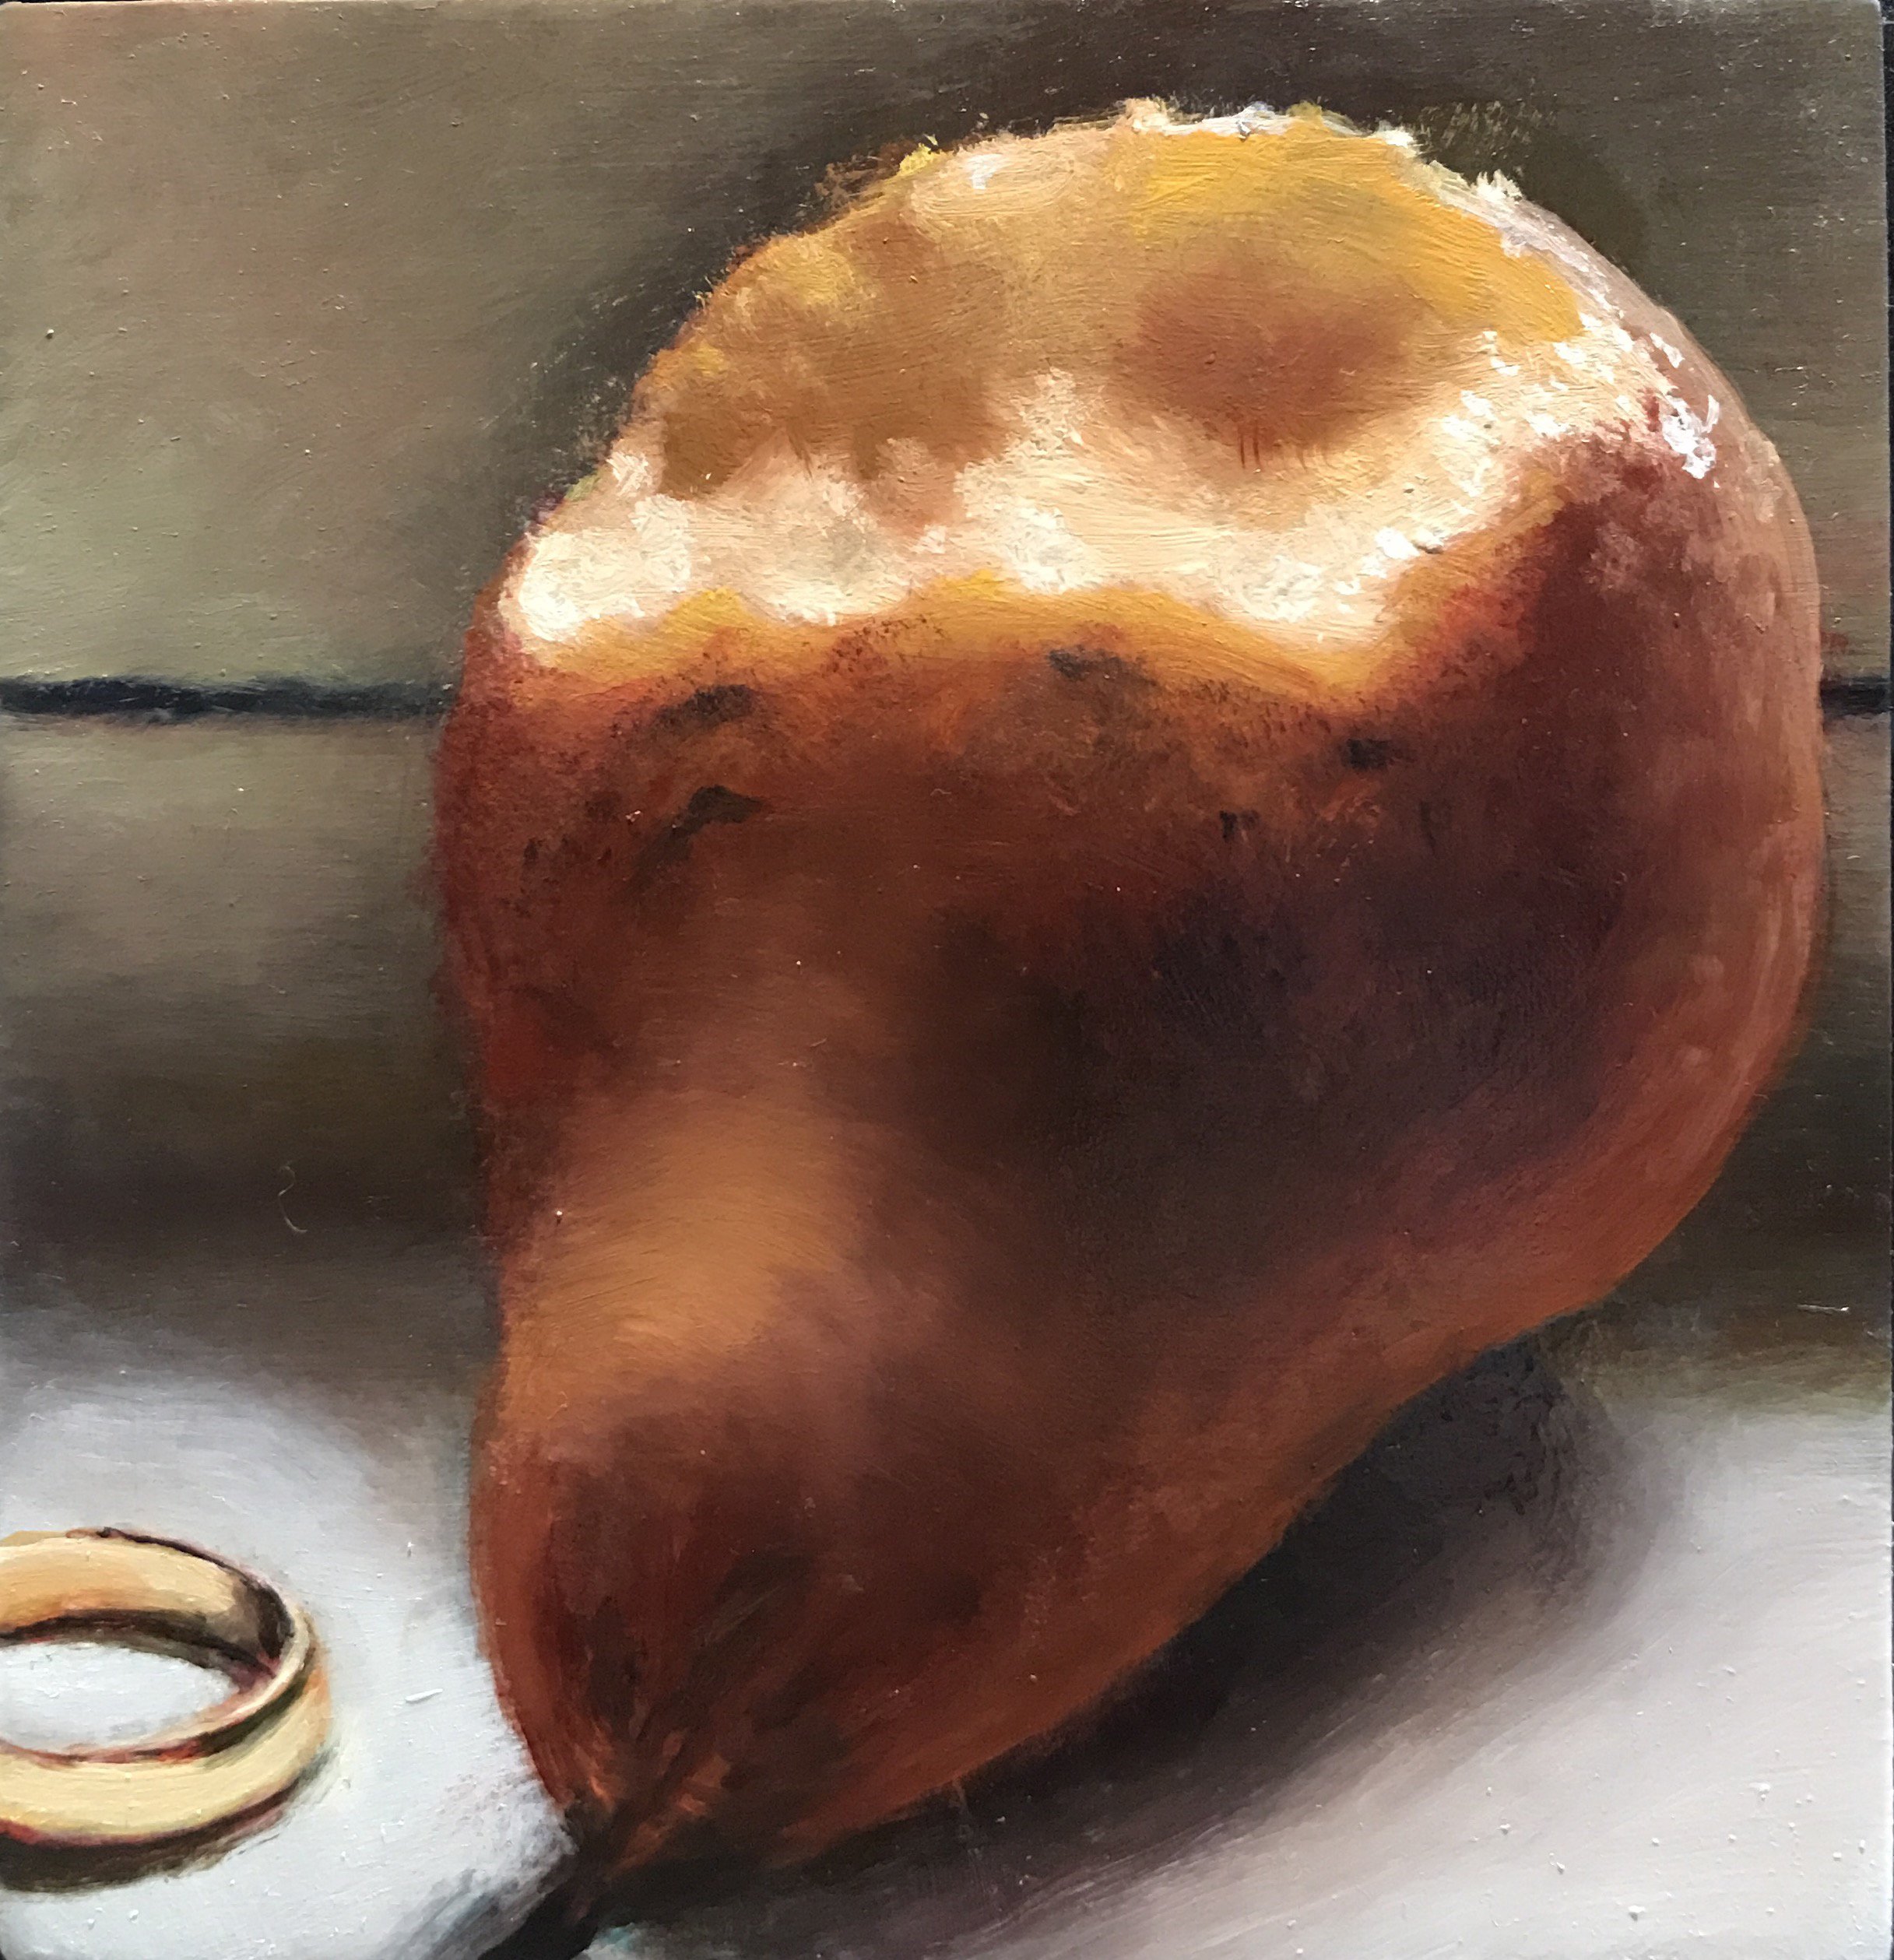  Inevitable No 4”  4” x 4”; Oil on wood   $325.  Half eaten pear and gold ring on a windowsill  